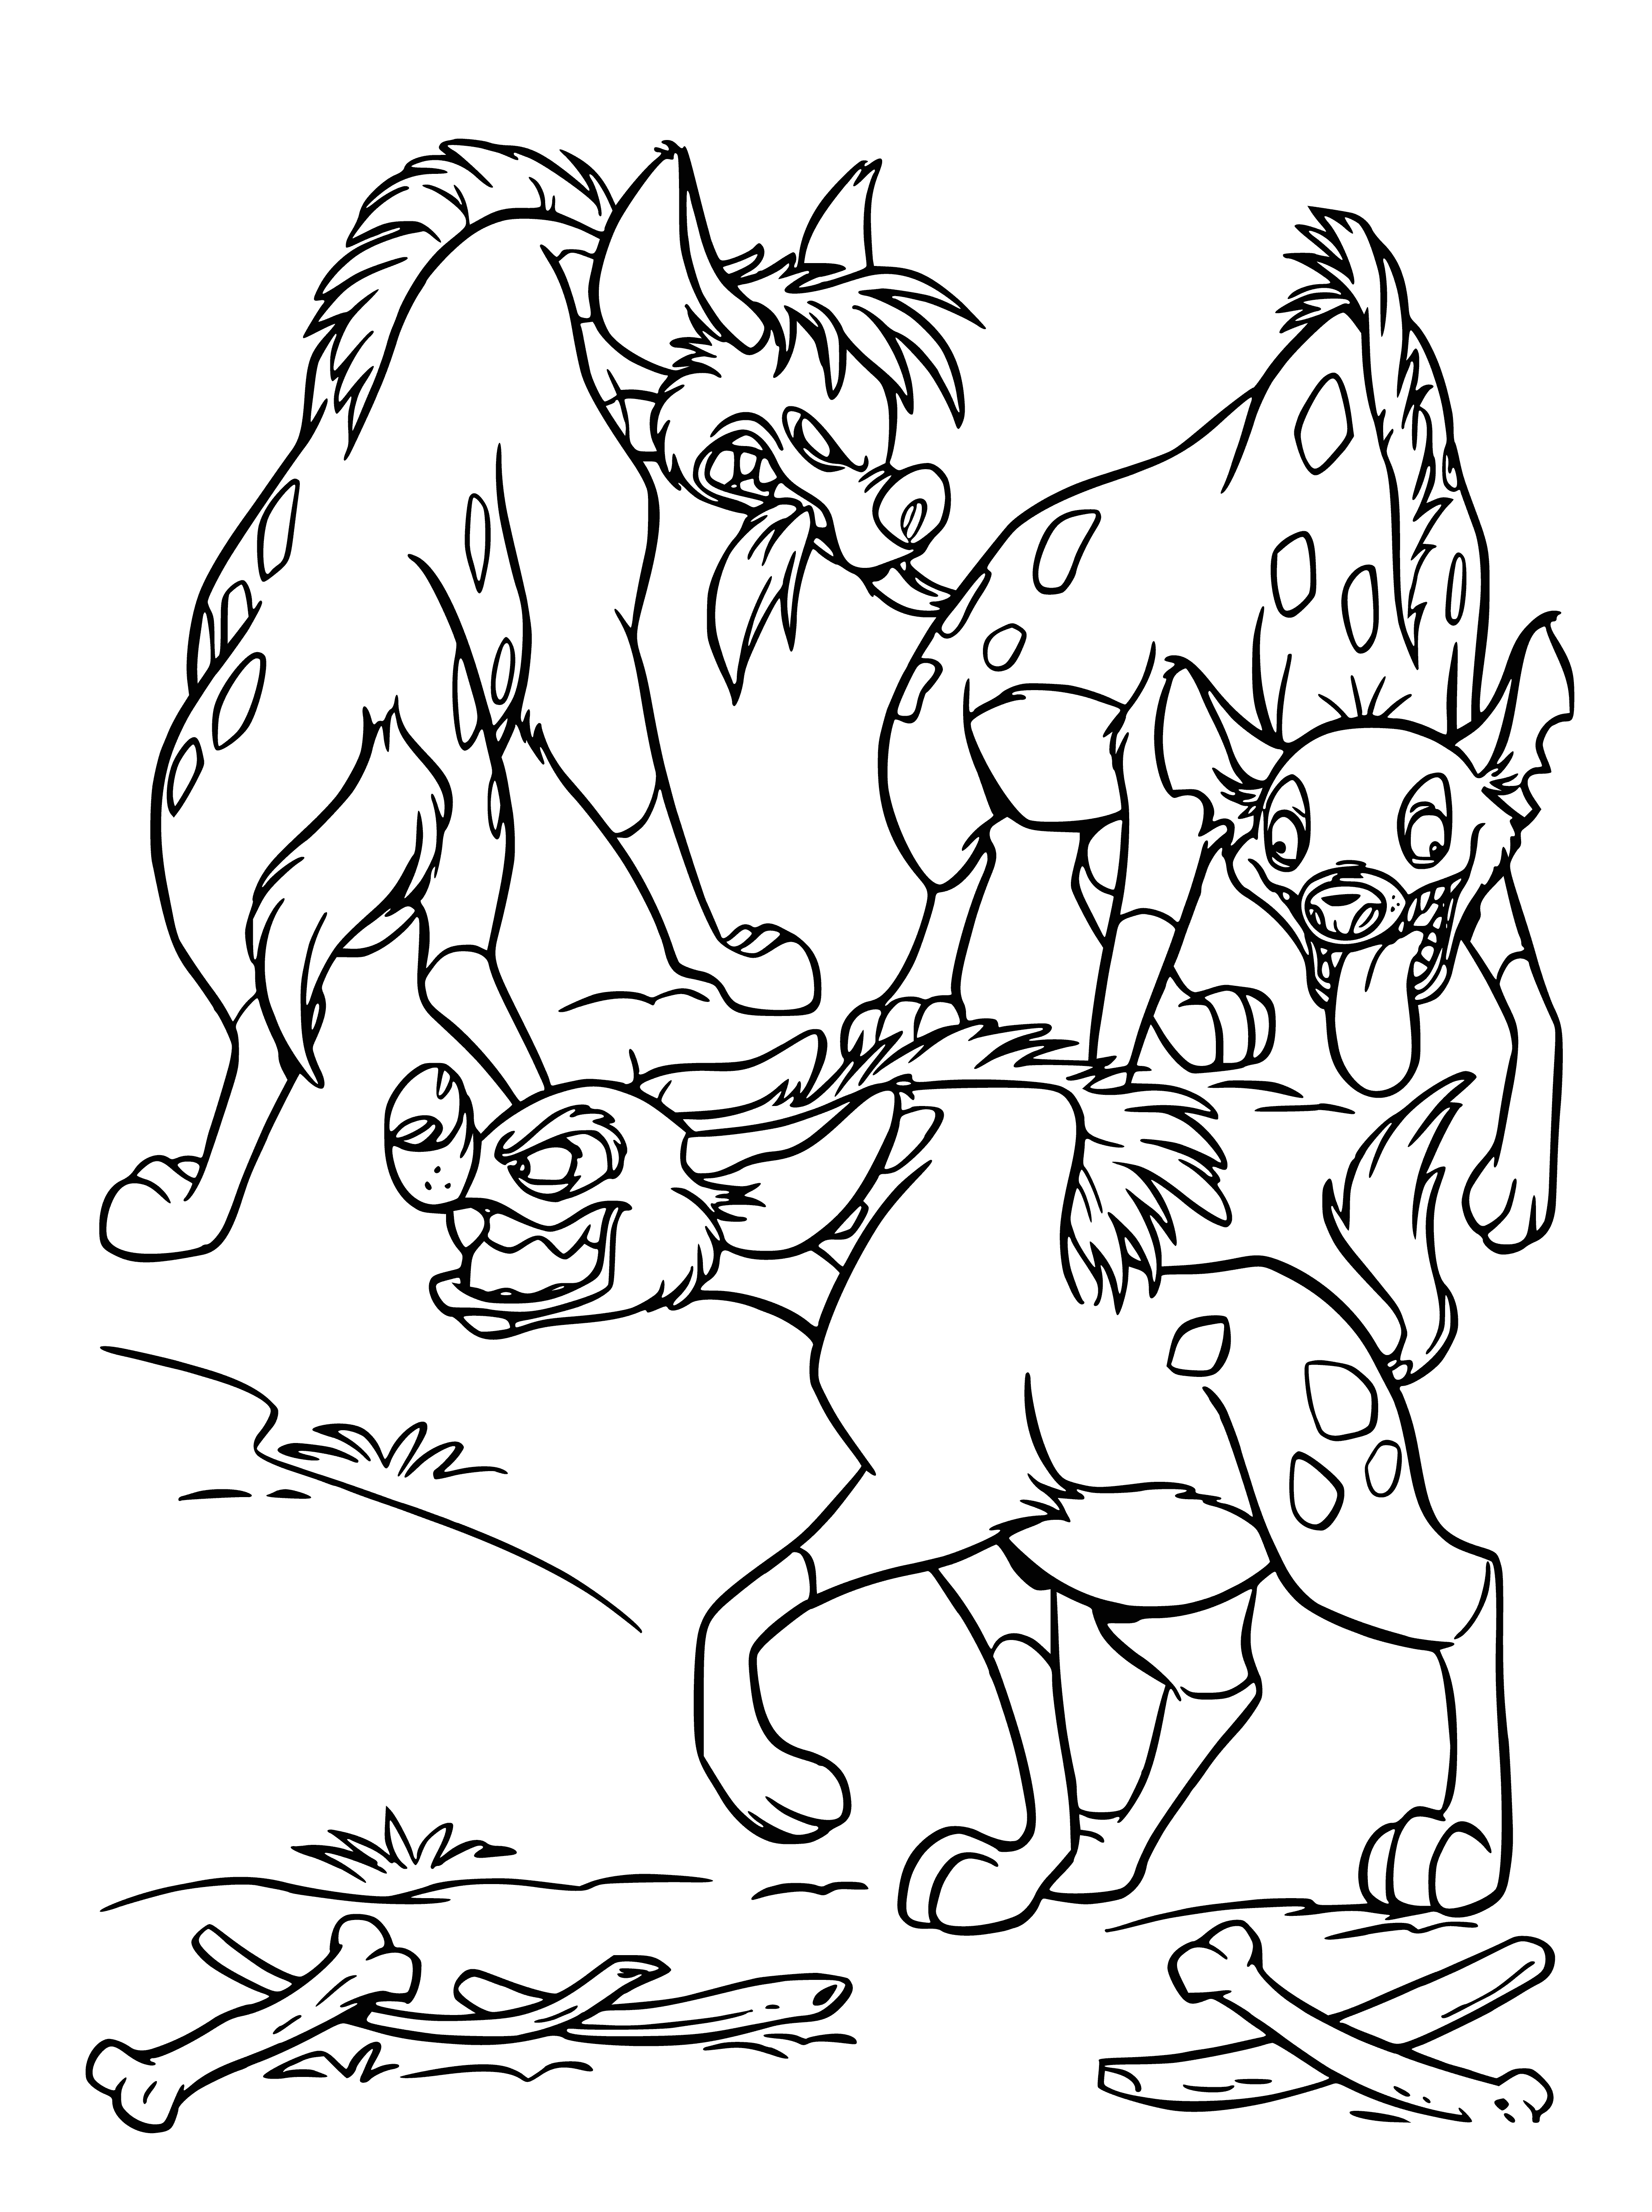 coloring page: Three robbers peer over their shoulders nervously in a sunset landscape of grassy plains and mountains.